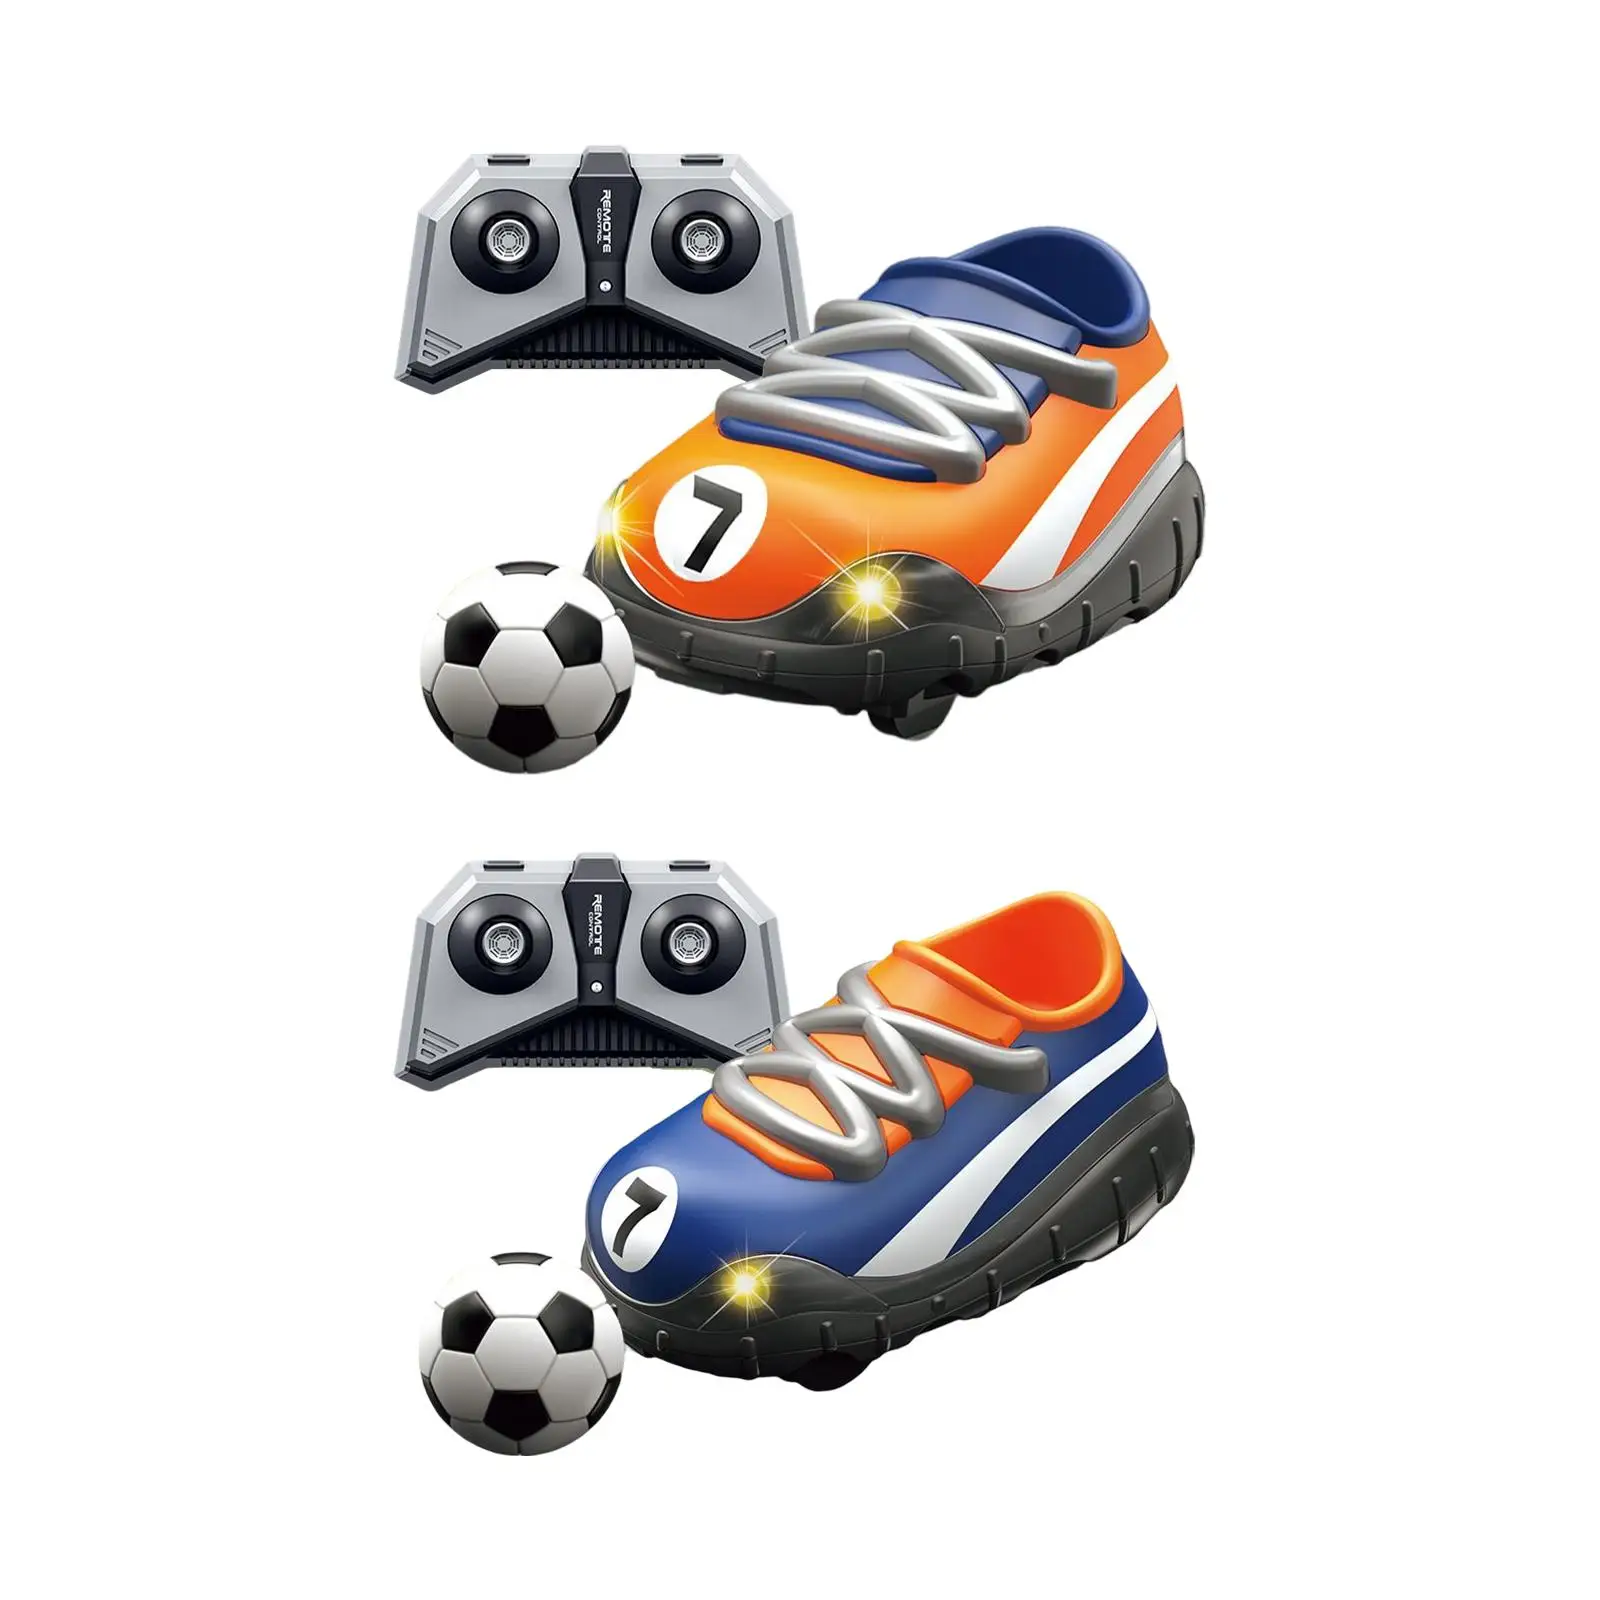 4 Channels RC Football Cars with LED Light Turn Right for Children Birthday Gifts